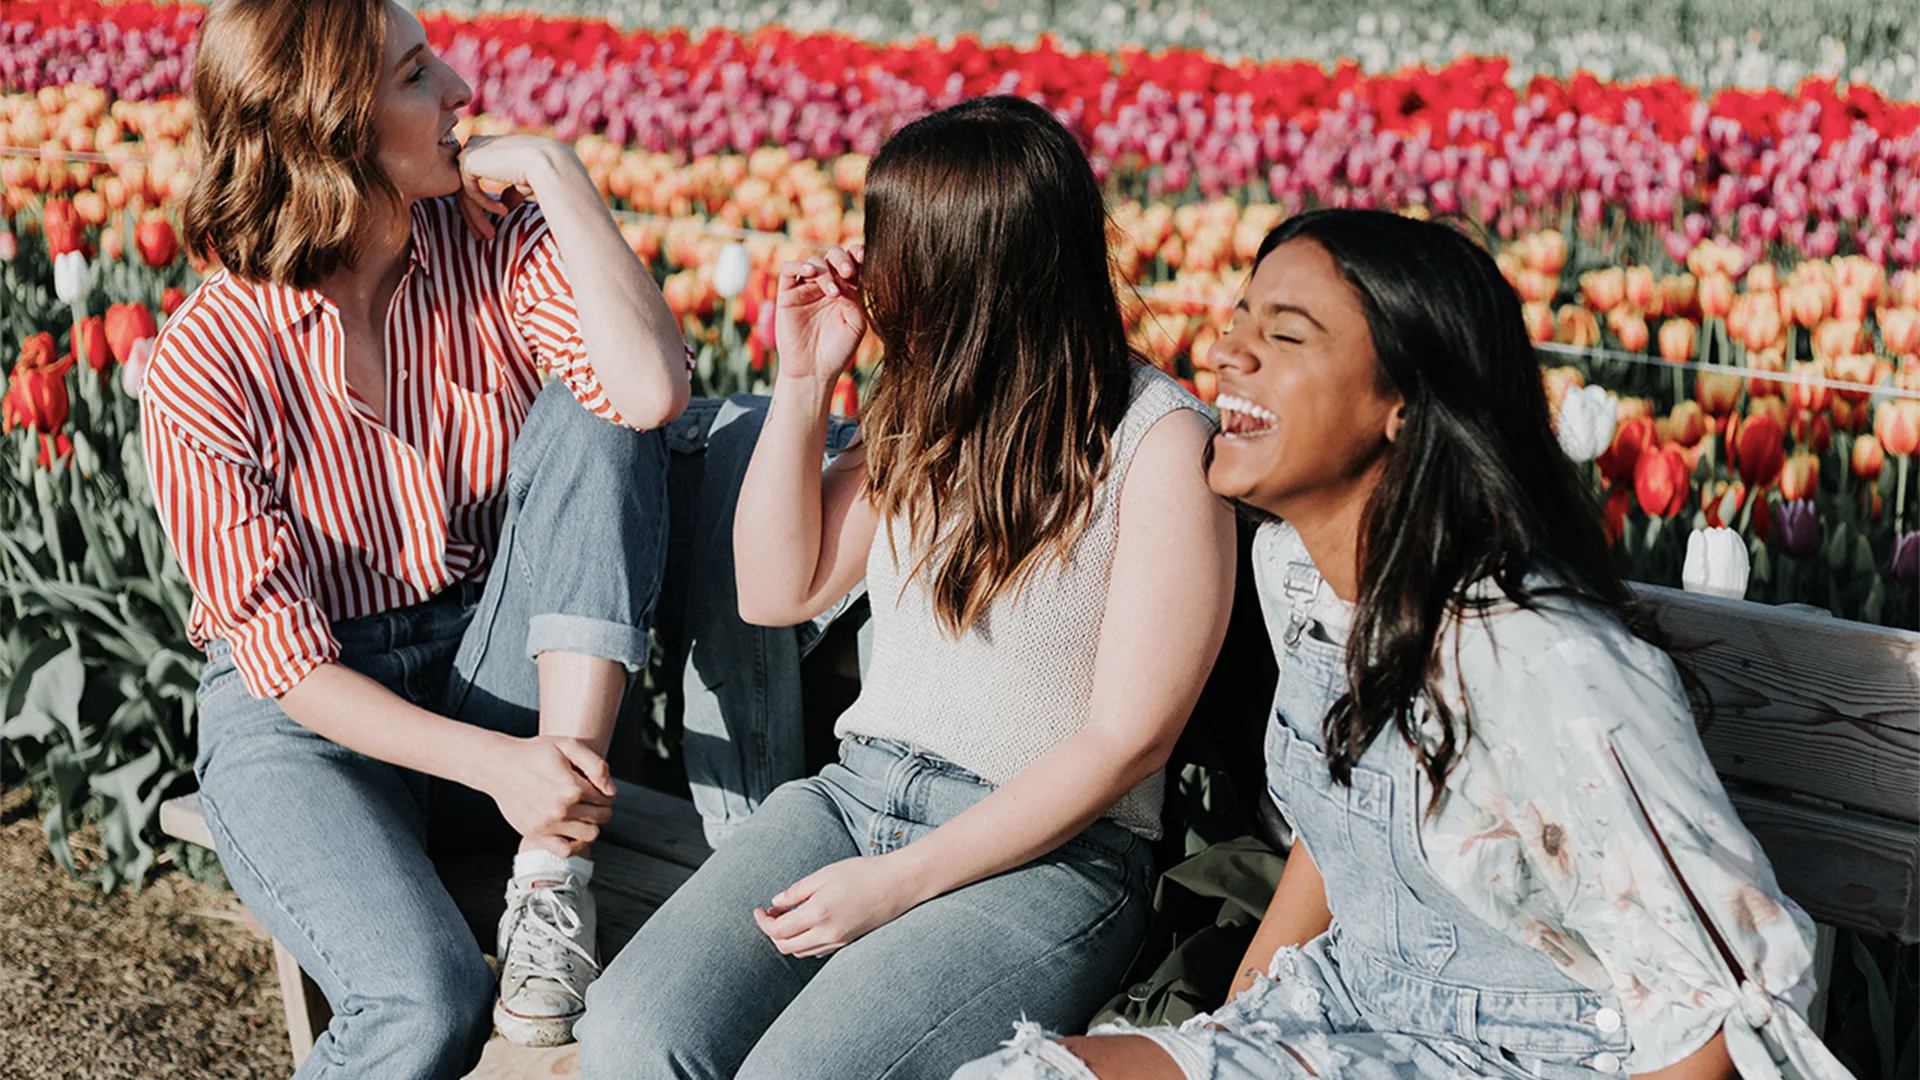 Three friends sat on a bench with a bed of flowers behind them